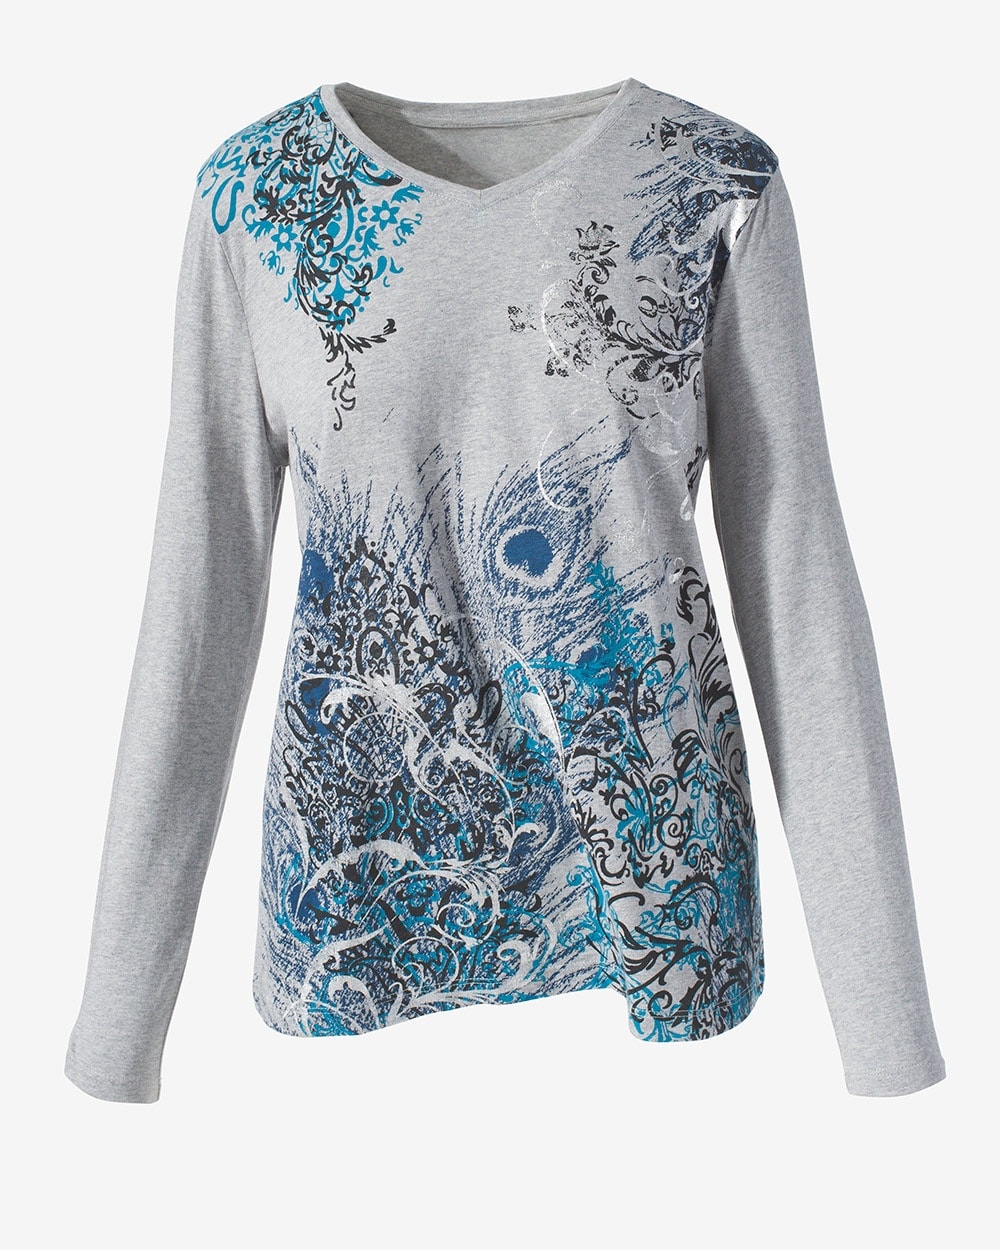 Weekends Royal Peacock Soft V-Neck Top